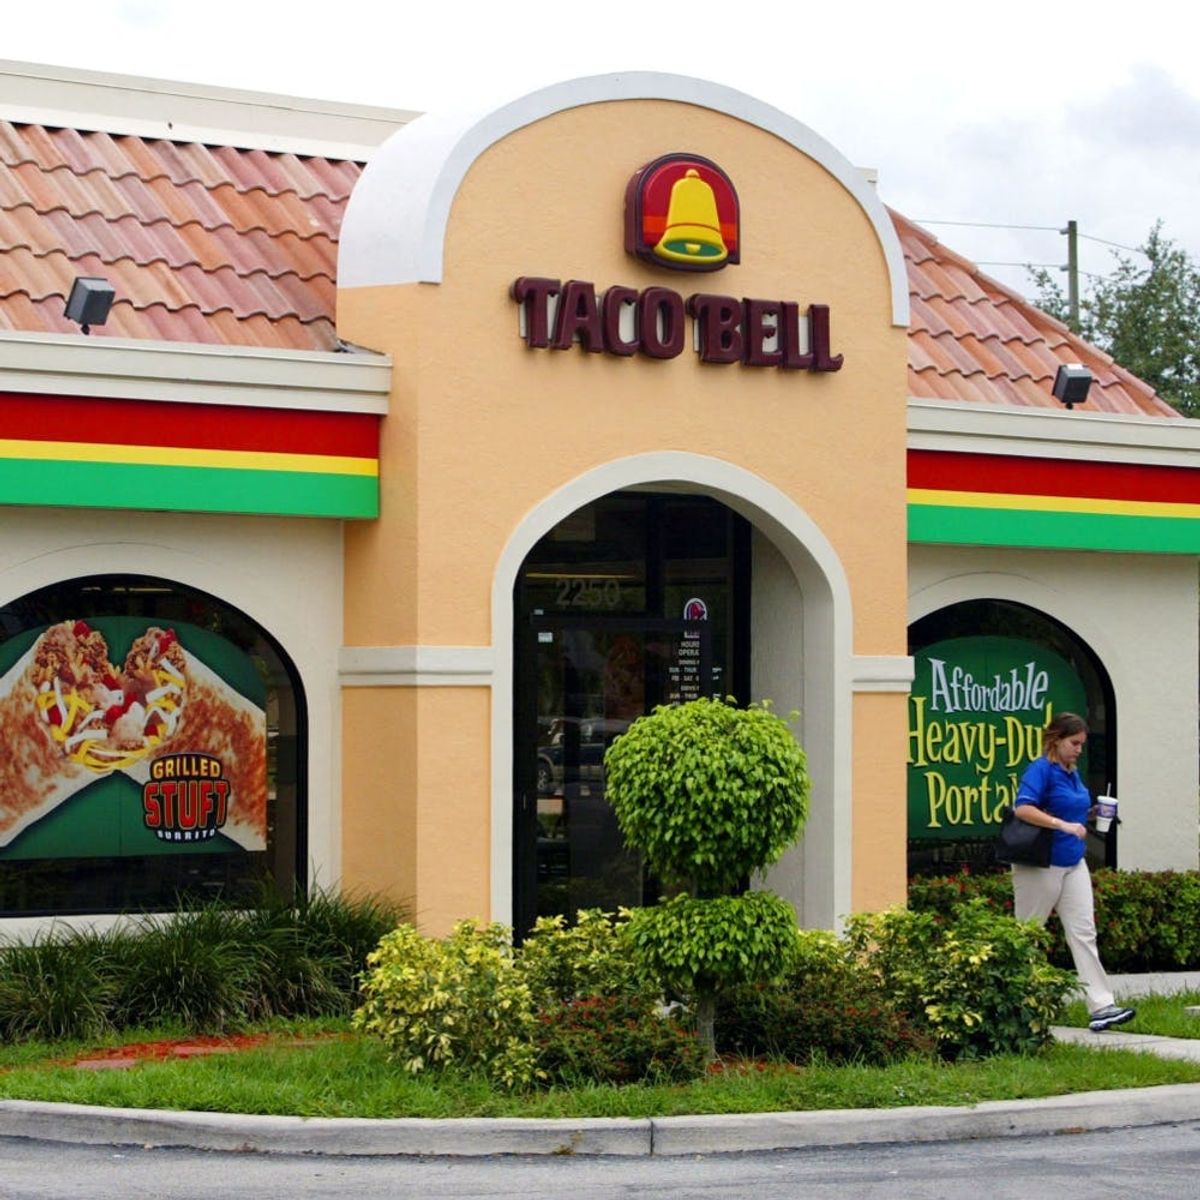 How to Get FREE Taco Bell Tacos and Jamba Juice Today